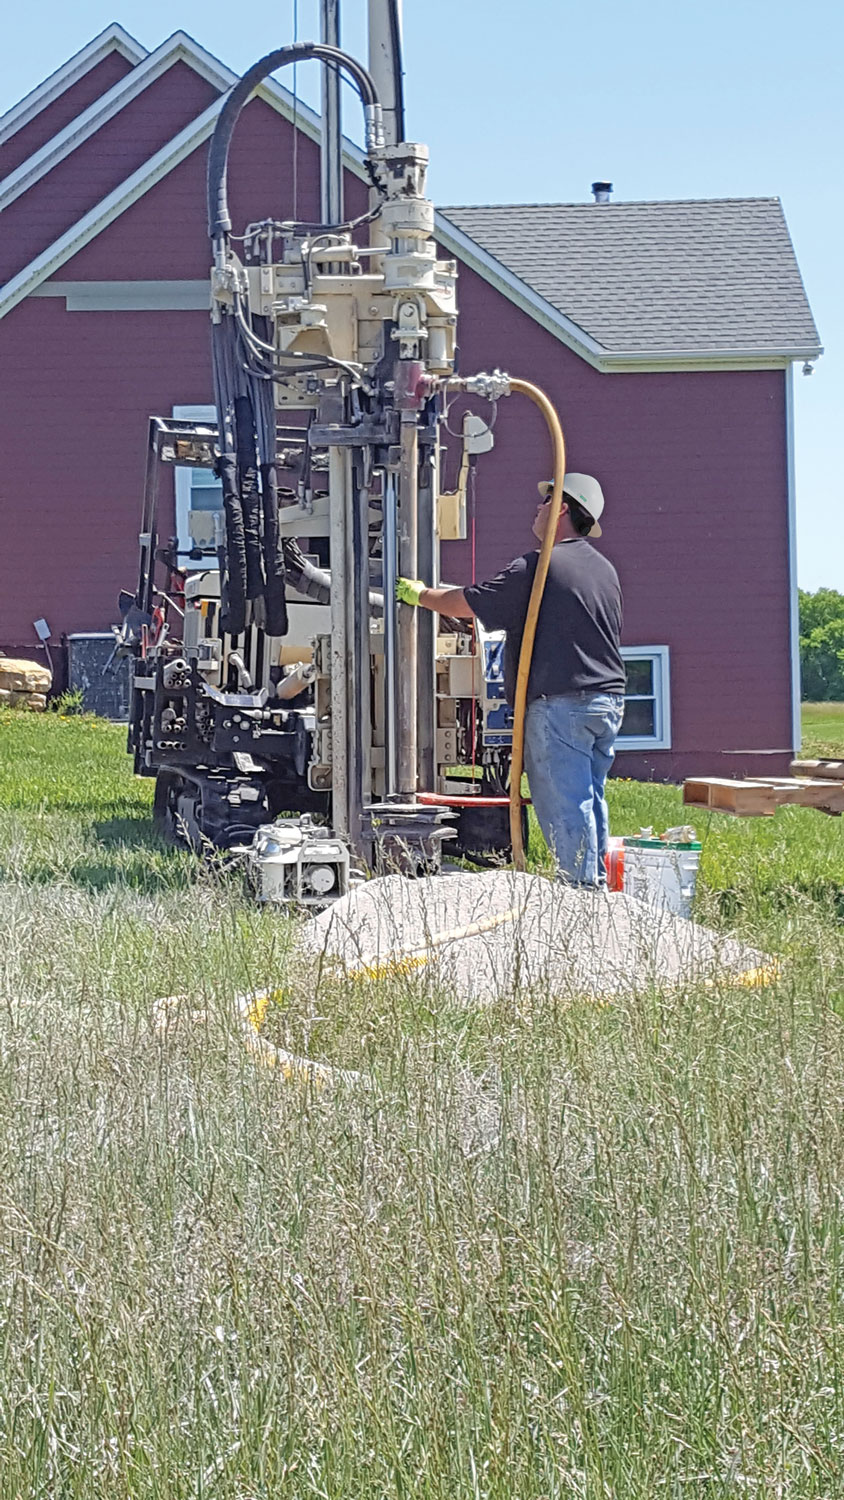 Installing geothermal loops in 6-inch diameter, 150-feet deep bores with a 7822DT using an industry-standard drill rod with a side-port swivel connected to rotary head. An external air compressor was used to clean cuttings out of boreholes and activate downhole hammer.